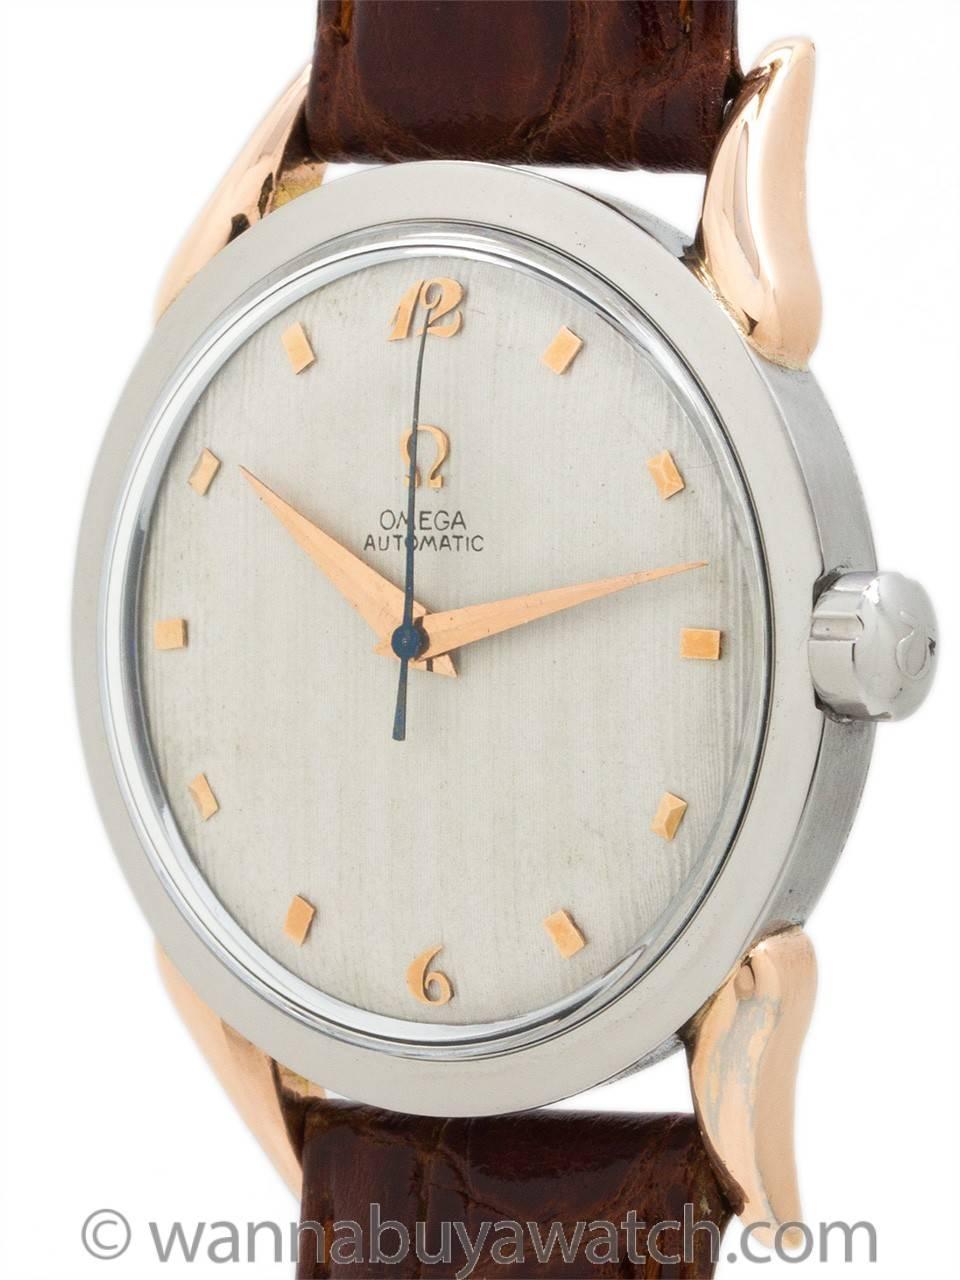 Great looking Omega man's model ref# 2597-1 automatic circa 1947 featuring 33mm diameter case with screw down case back, steel case, and rose gold curved lugs circa 1947. Very attractive 2 tone design case, acrylic crystal, nicely restored matte